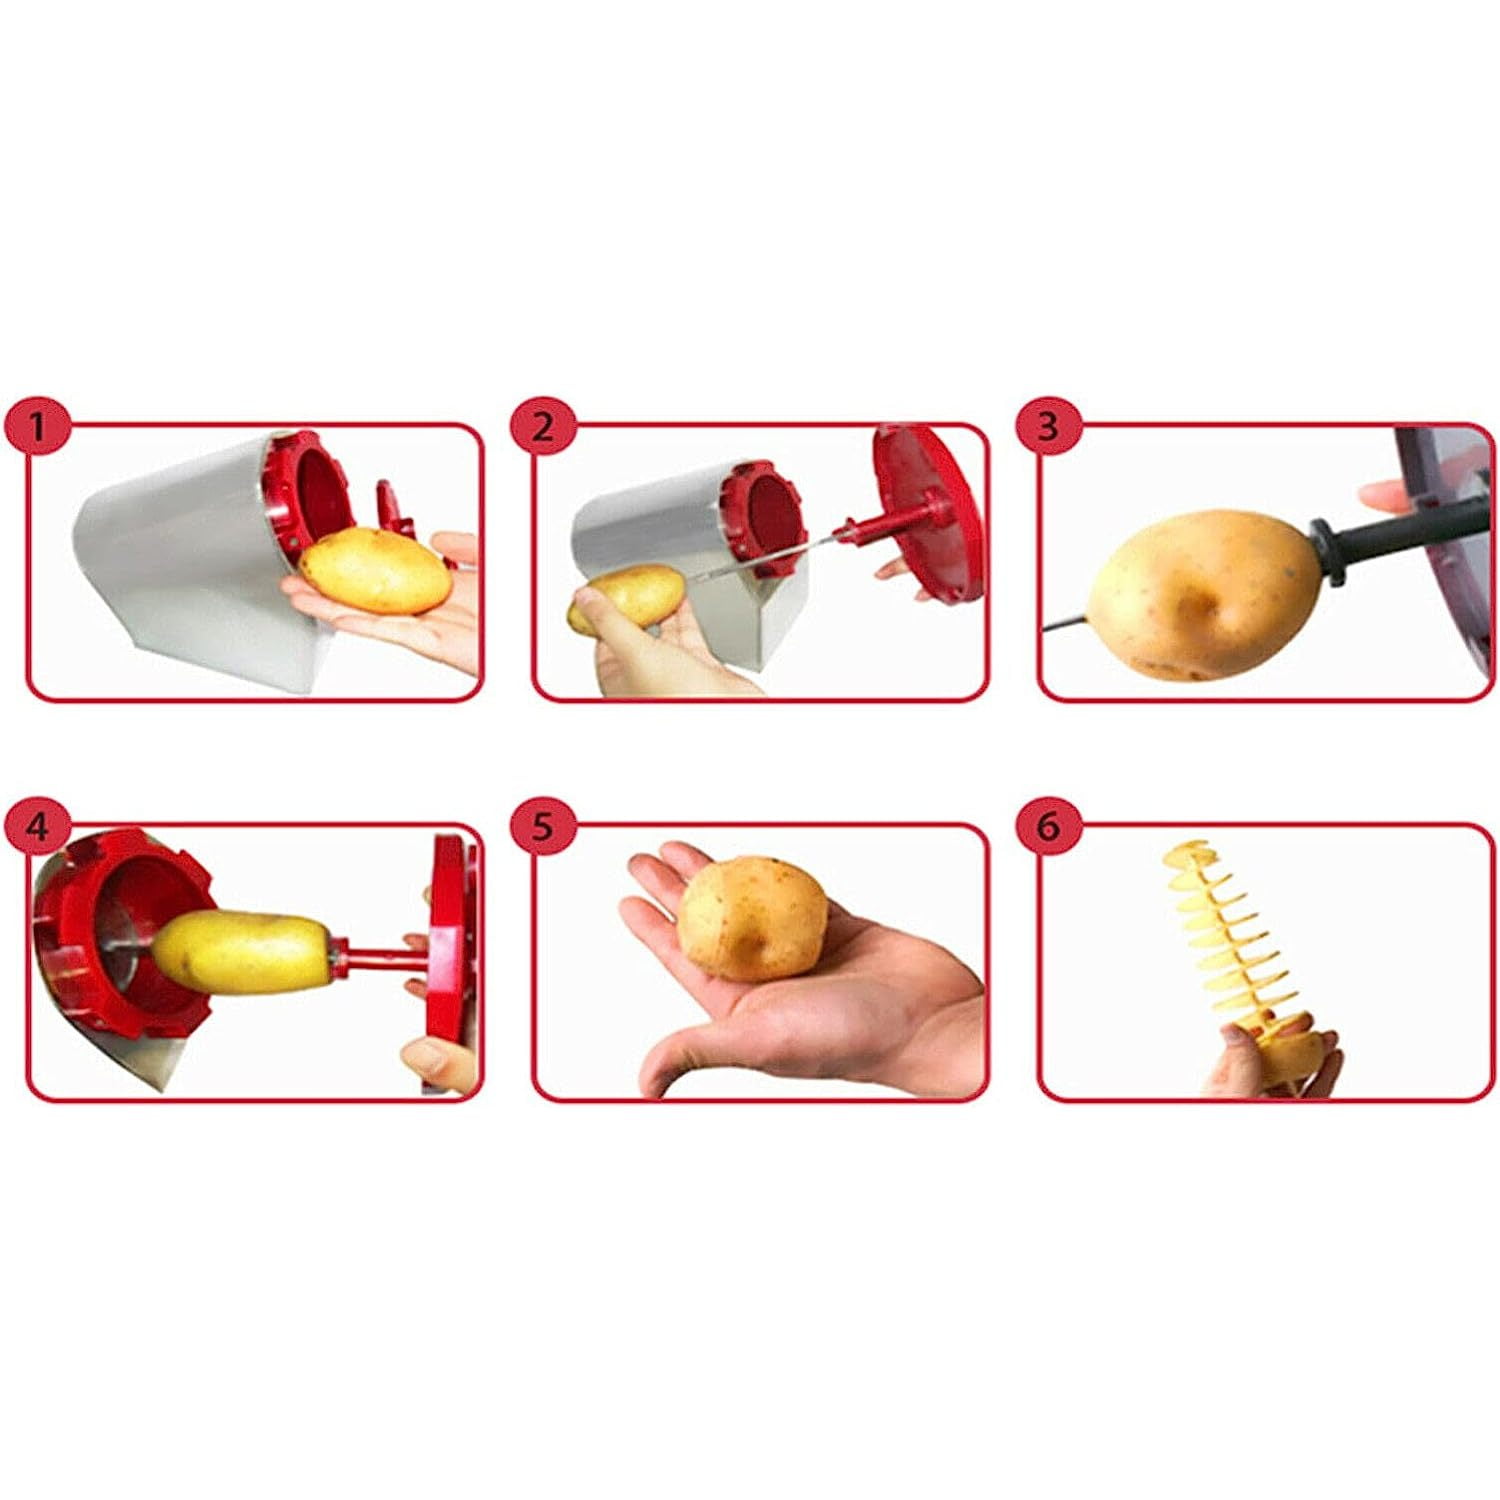 Travelwant 3 in 1 Manual Tornado Potato Slicer Spiral Potato Cutter Twisted Potato Slicer Spiral Twister Cutter Thicker Stainless Steel Vegetables